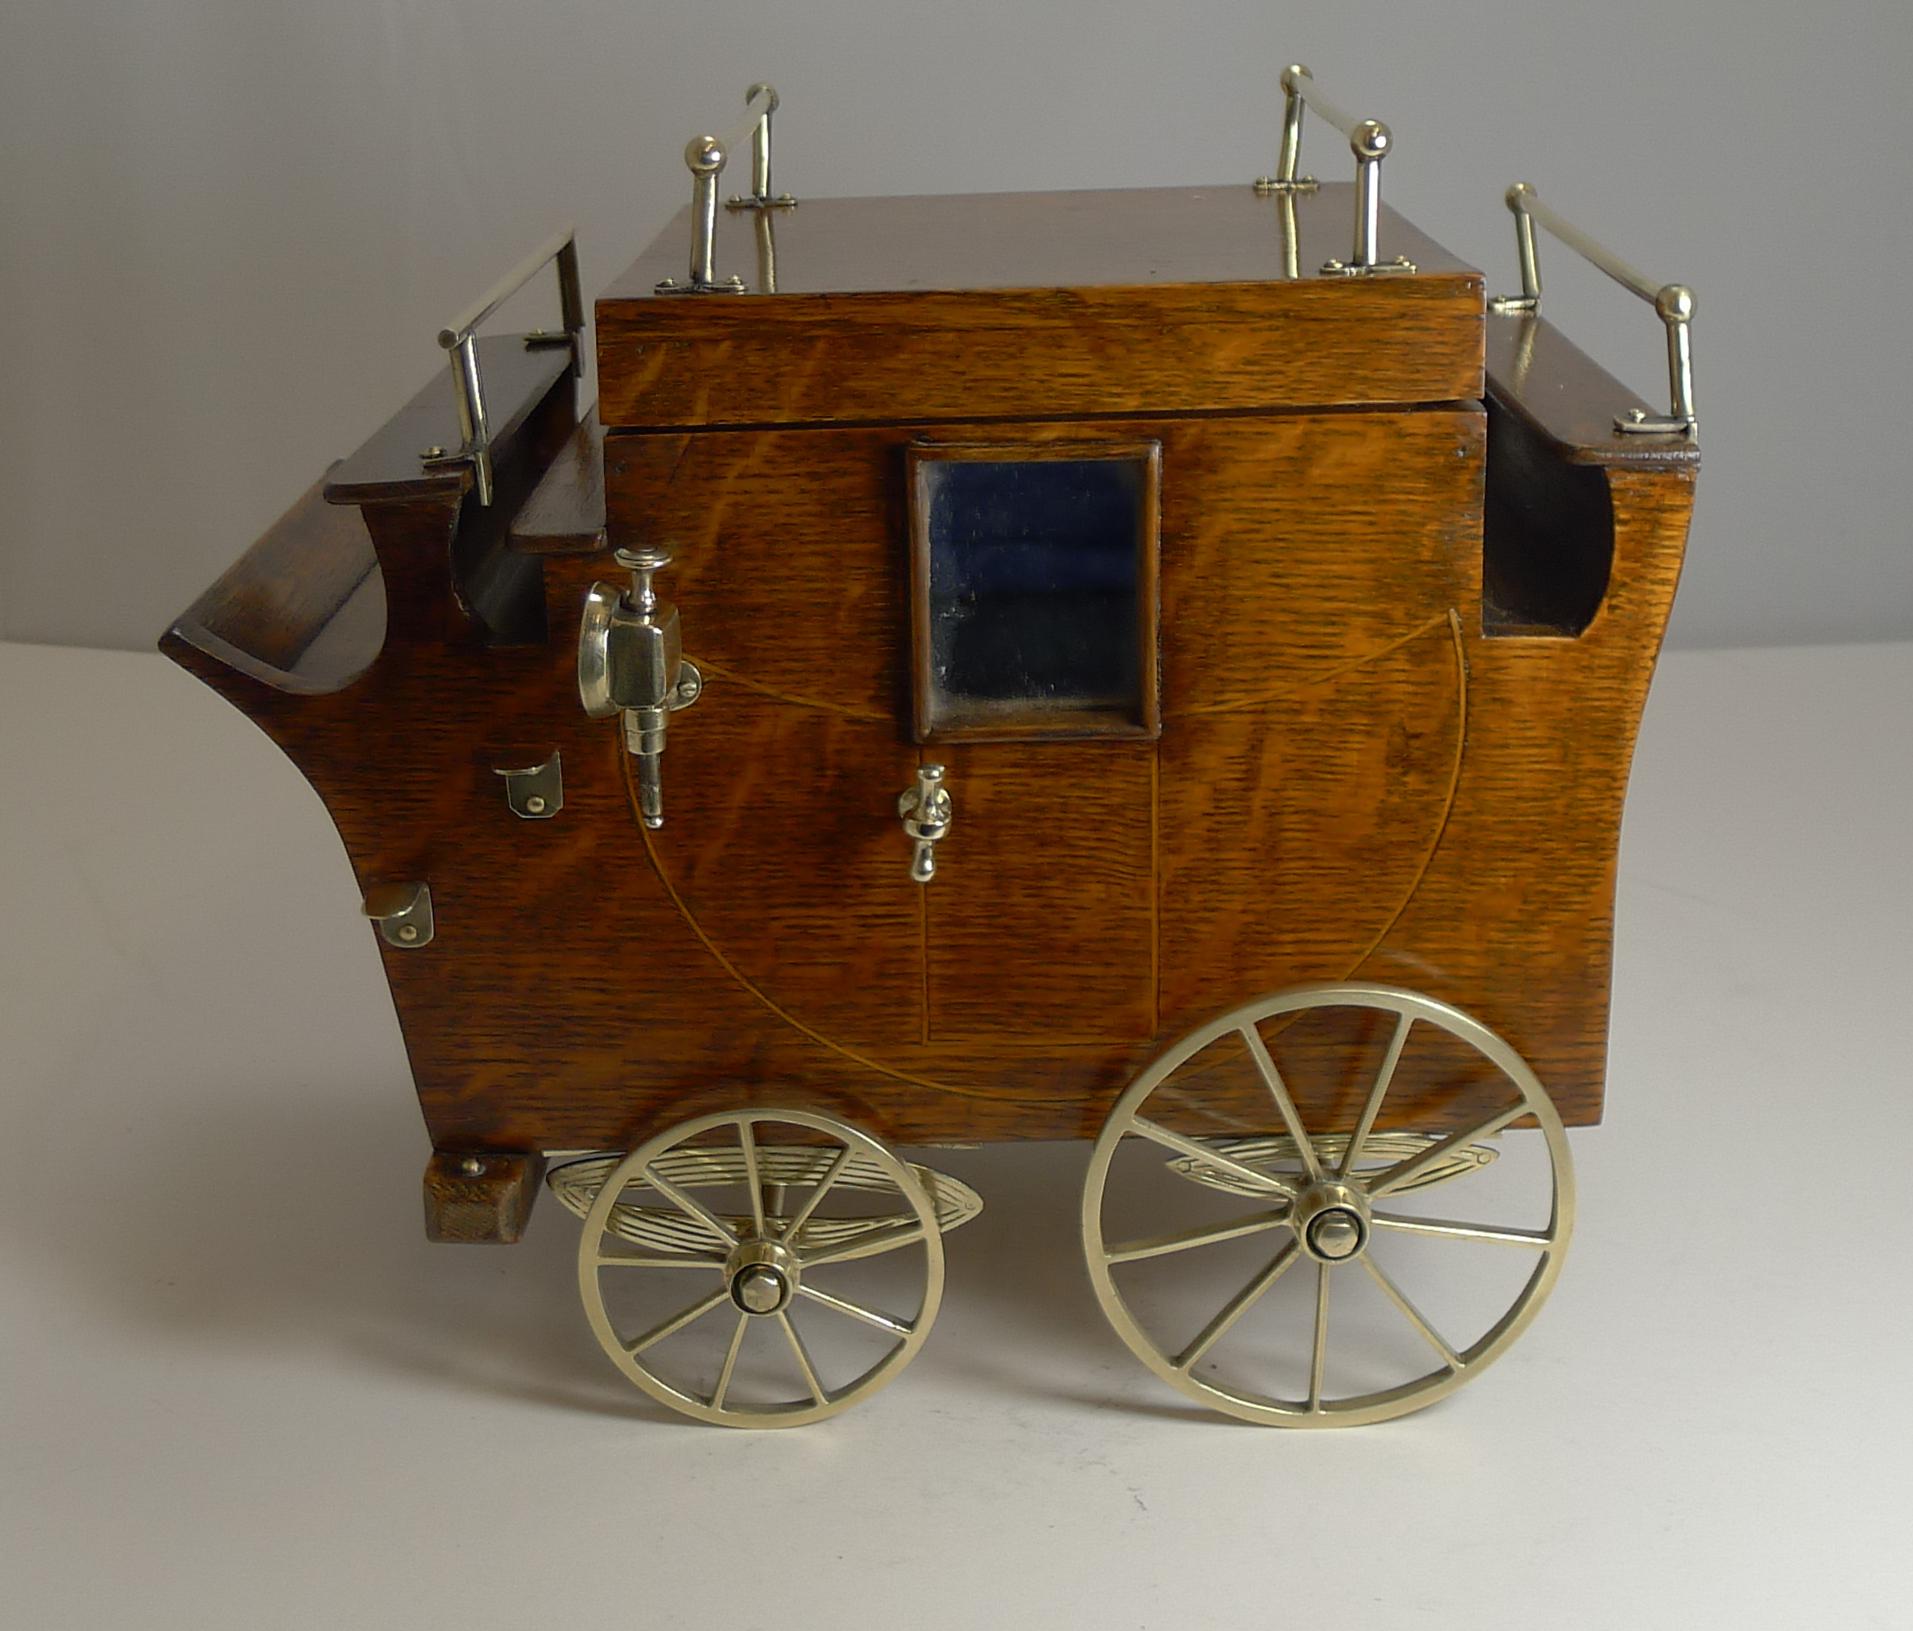 Rarely found or even seen, this novelty Edwardian cigar box is beautifully executed in solid oak in the form of a horse drawn carriage.

The sides are inlaid to emulate the panelling and door, the window made from the original mirrored glass. To